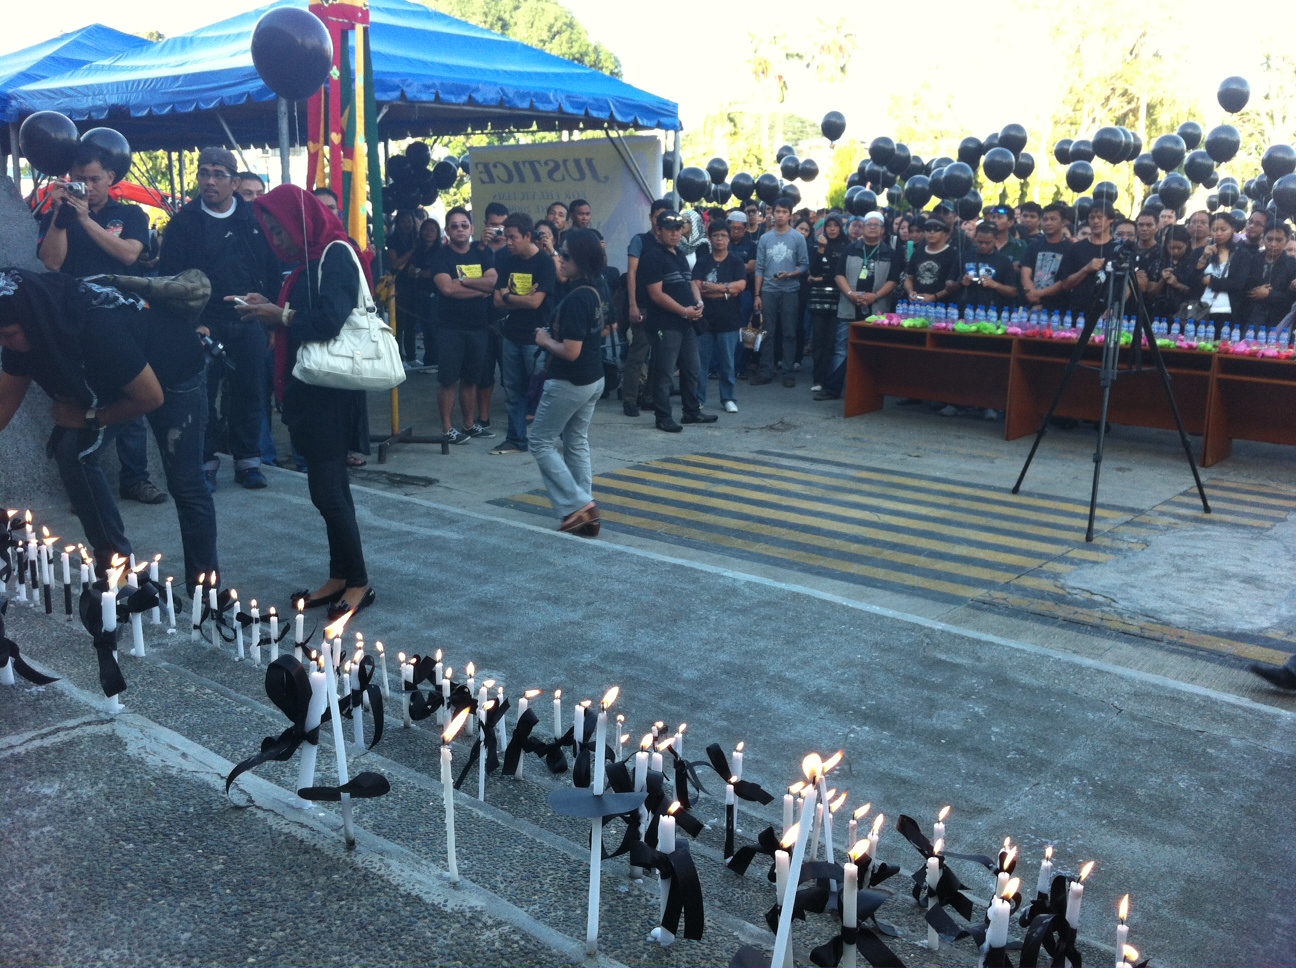 REMEMBERING THE DEAD. Media men and government employees in ARMM gather to remember the victims of the Maguindanao massacre. Photo by Ferdinandh Cabrera.